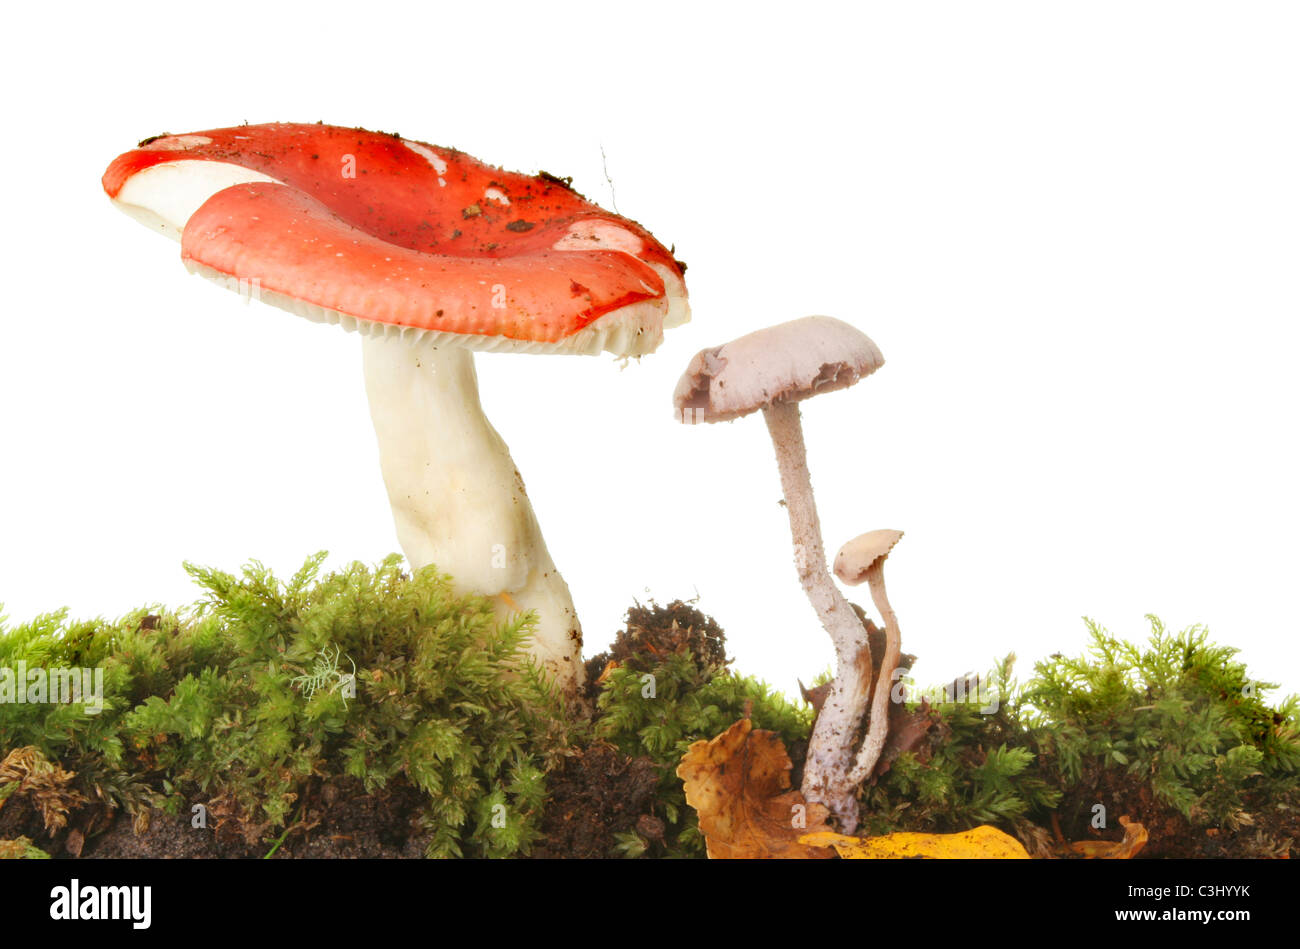 Large red and two small gray toadstools growing in a bed of moss Stock Photo